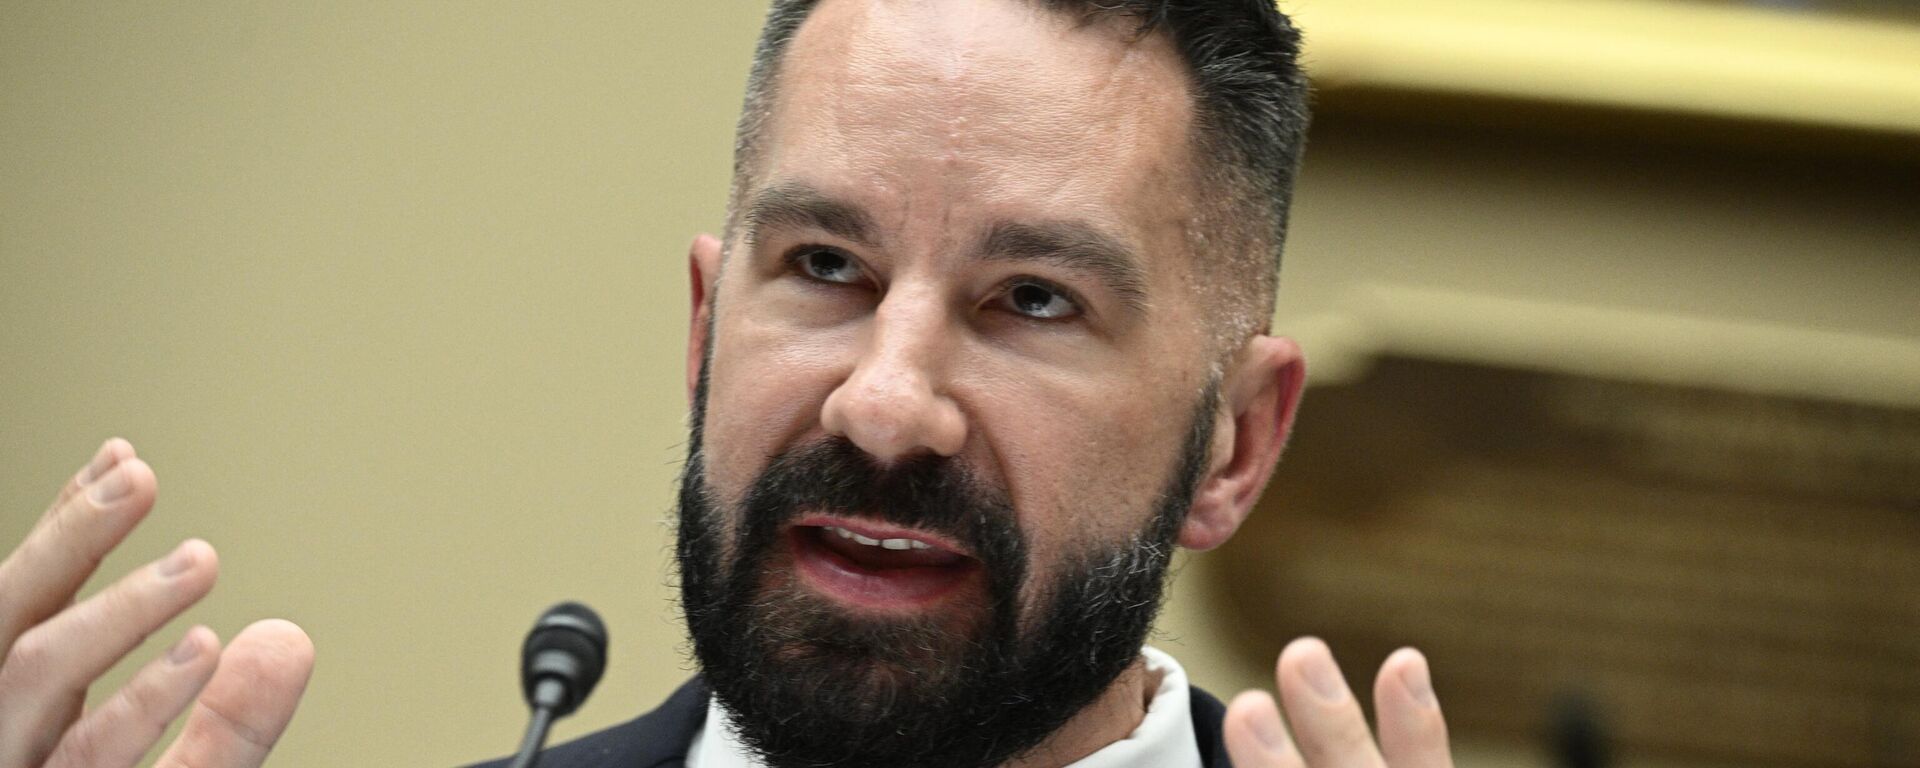 Joe Ziegler, Internal Revenue Service (IRS) whistleblower X, testifies before the House Committee on Oversight and Accountability during a hearing regarding the criminal investigation into the Bidens, on Capitol Hill in Washington, DC, on July 19, 2023. - Sputnik International, 1920, 21.07.2023